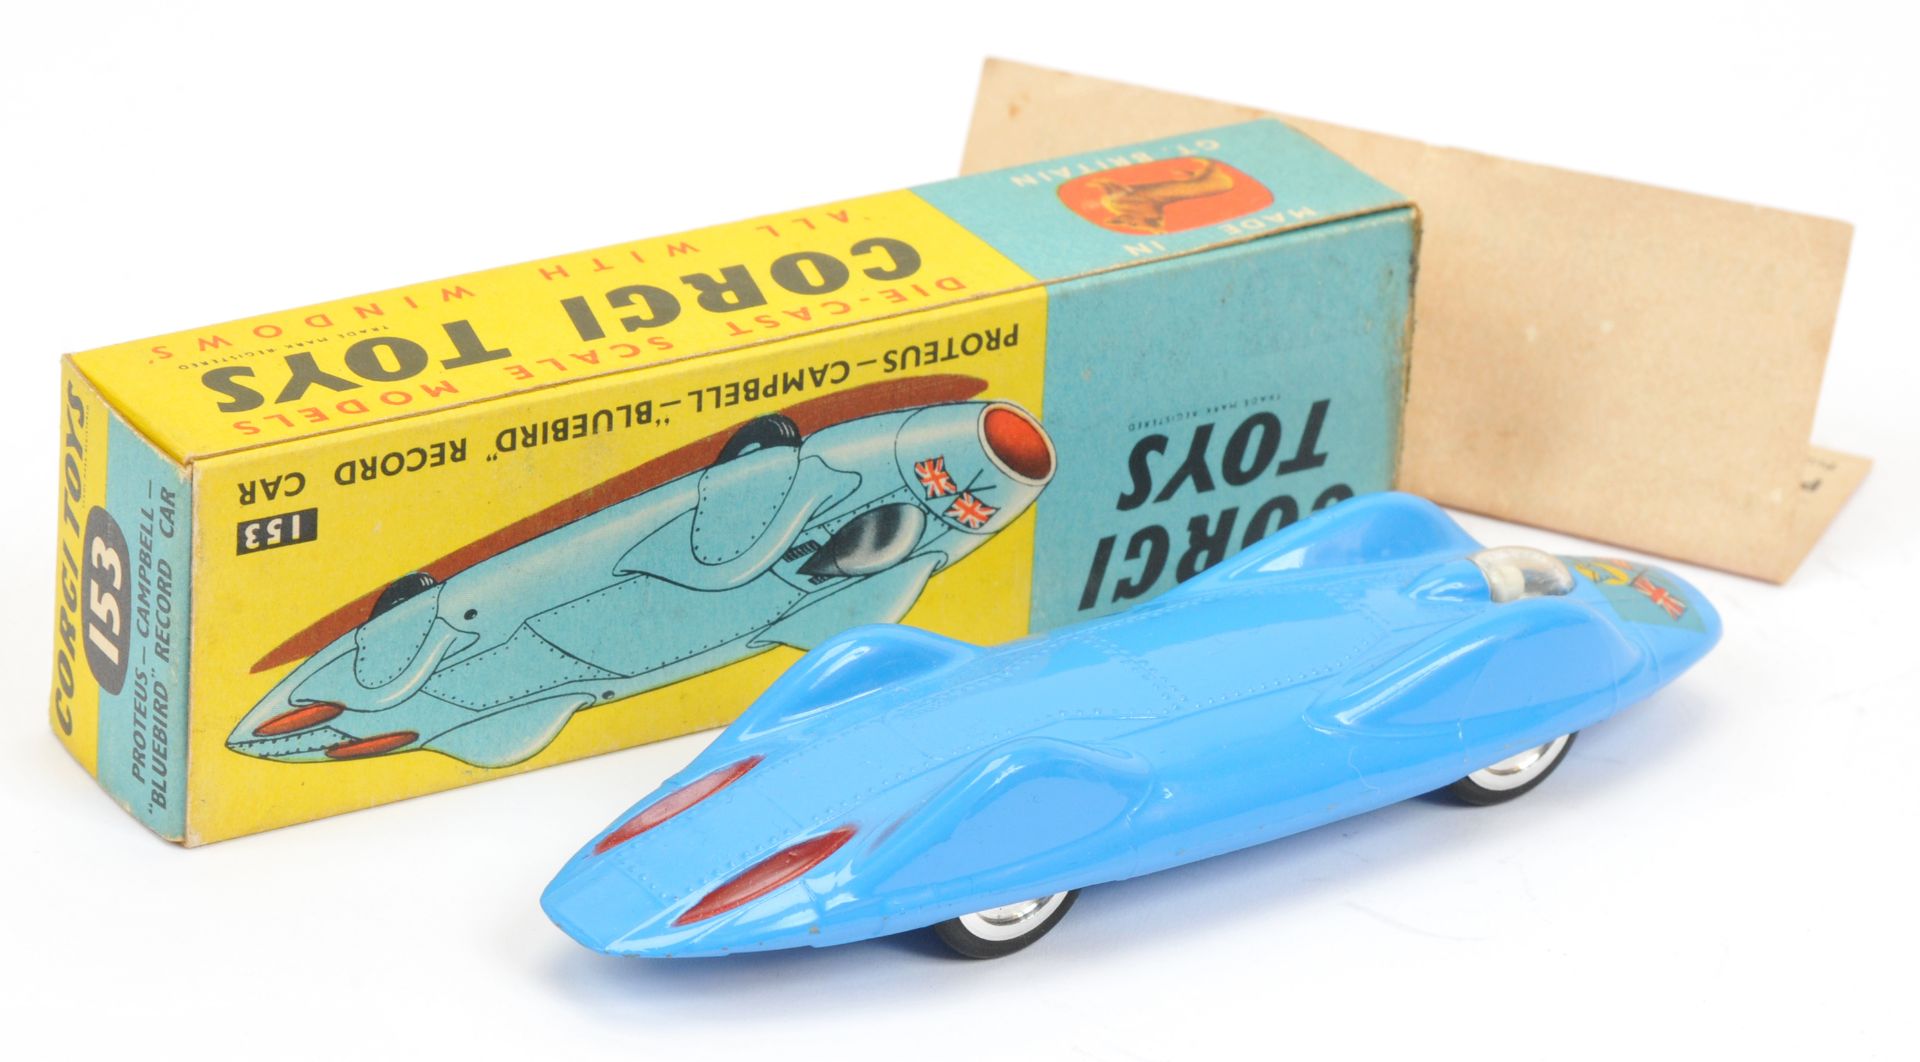 Corgi Toys 153 Proteus-Campbell Record car - blue body with red rear flashes, chrome spun hubs - Image 2 of 2